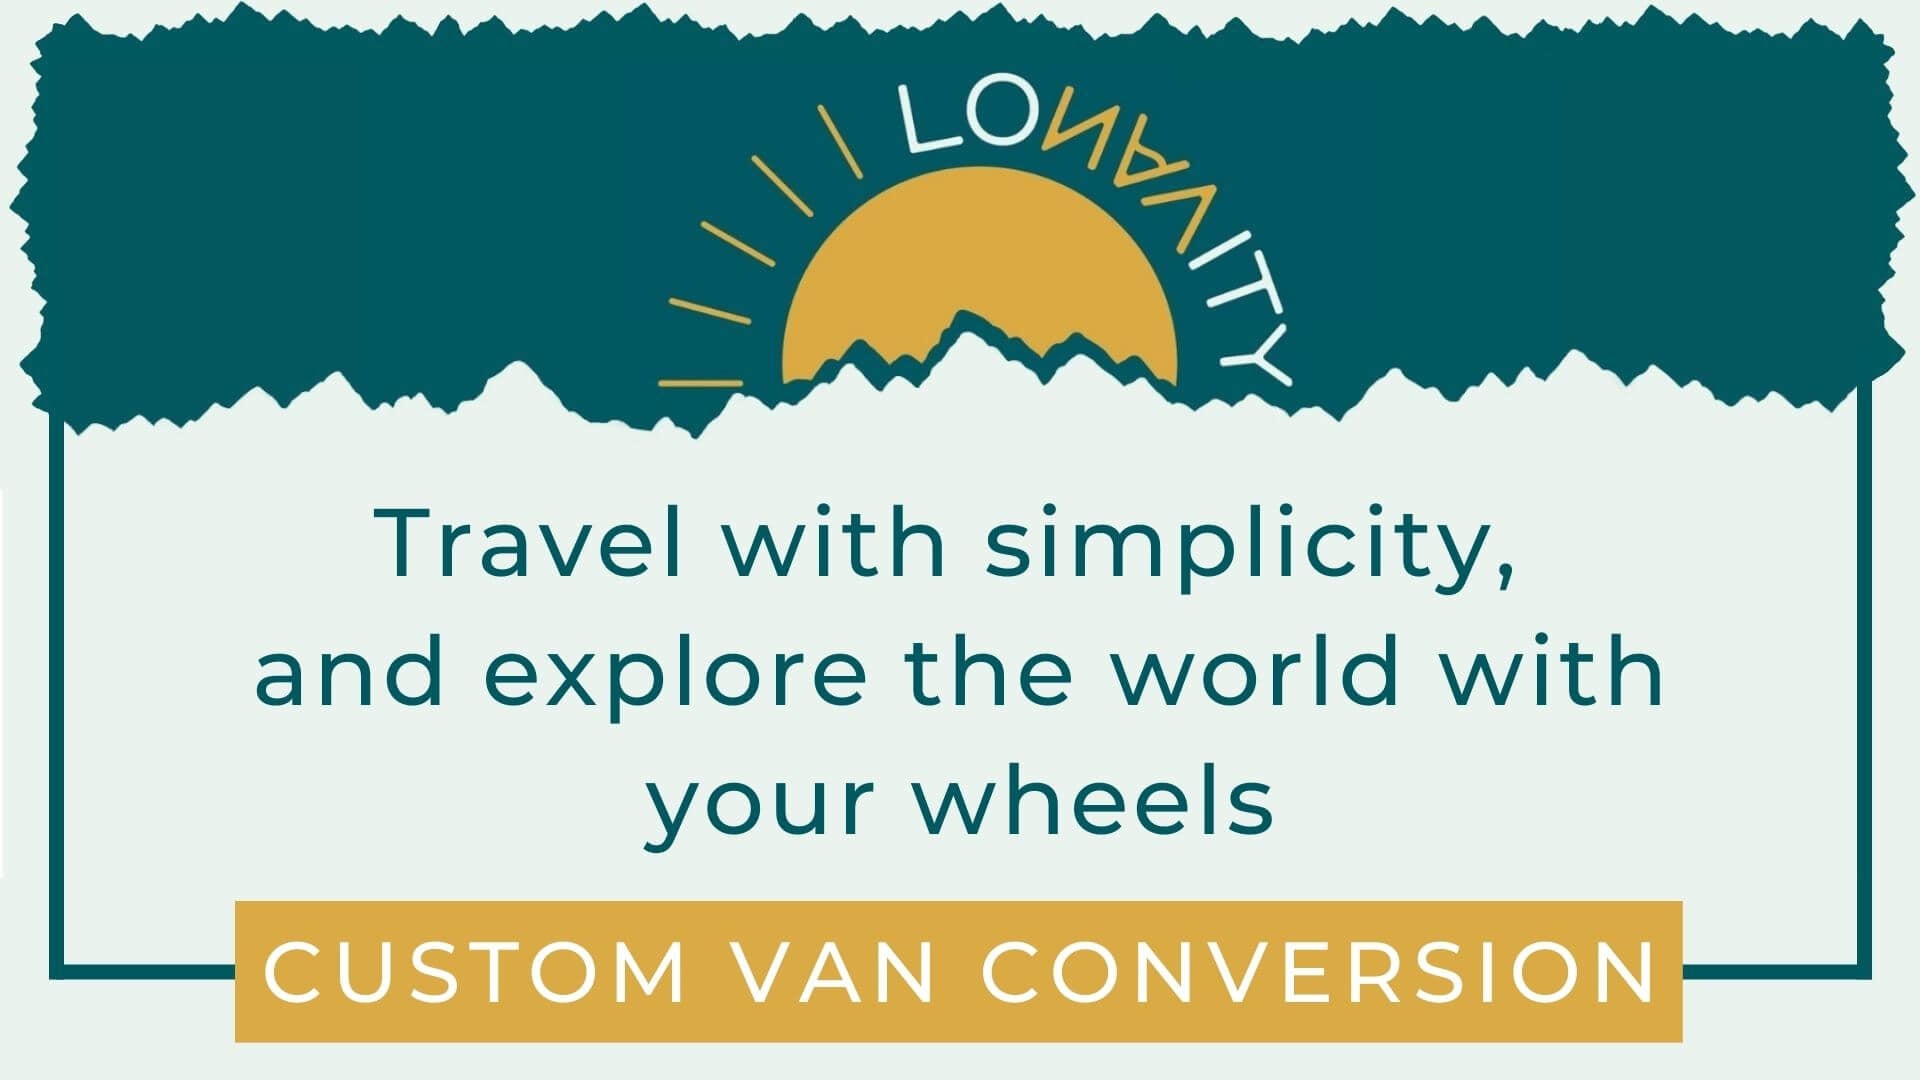 Lonavity custom van conversion. Travel with simplicity, and explore de world with your wheels